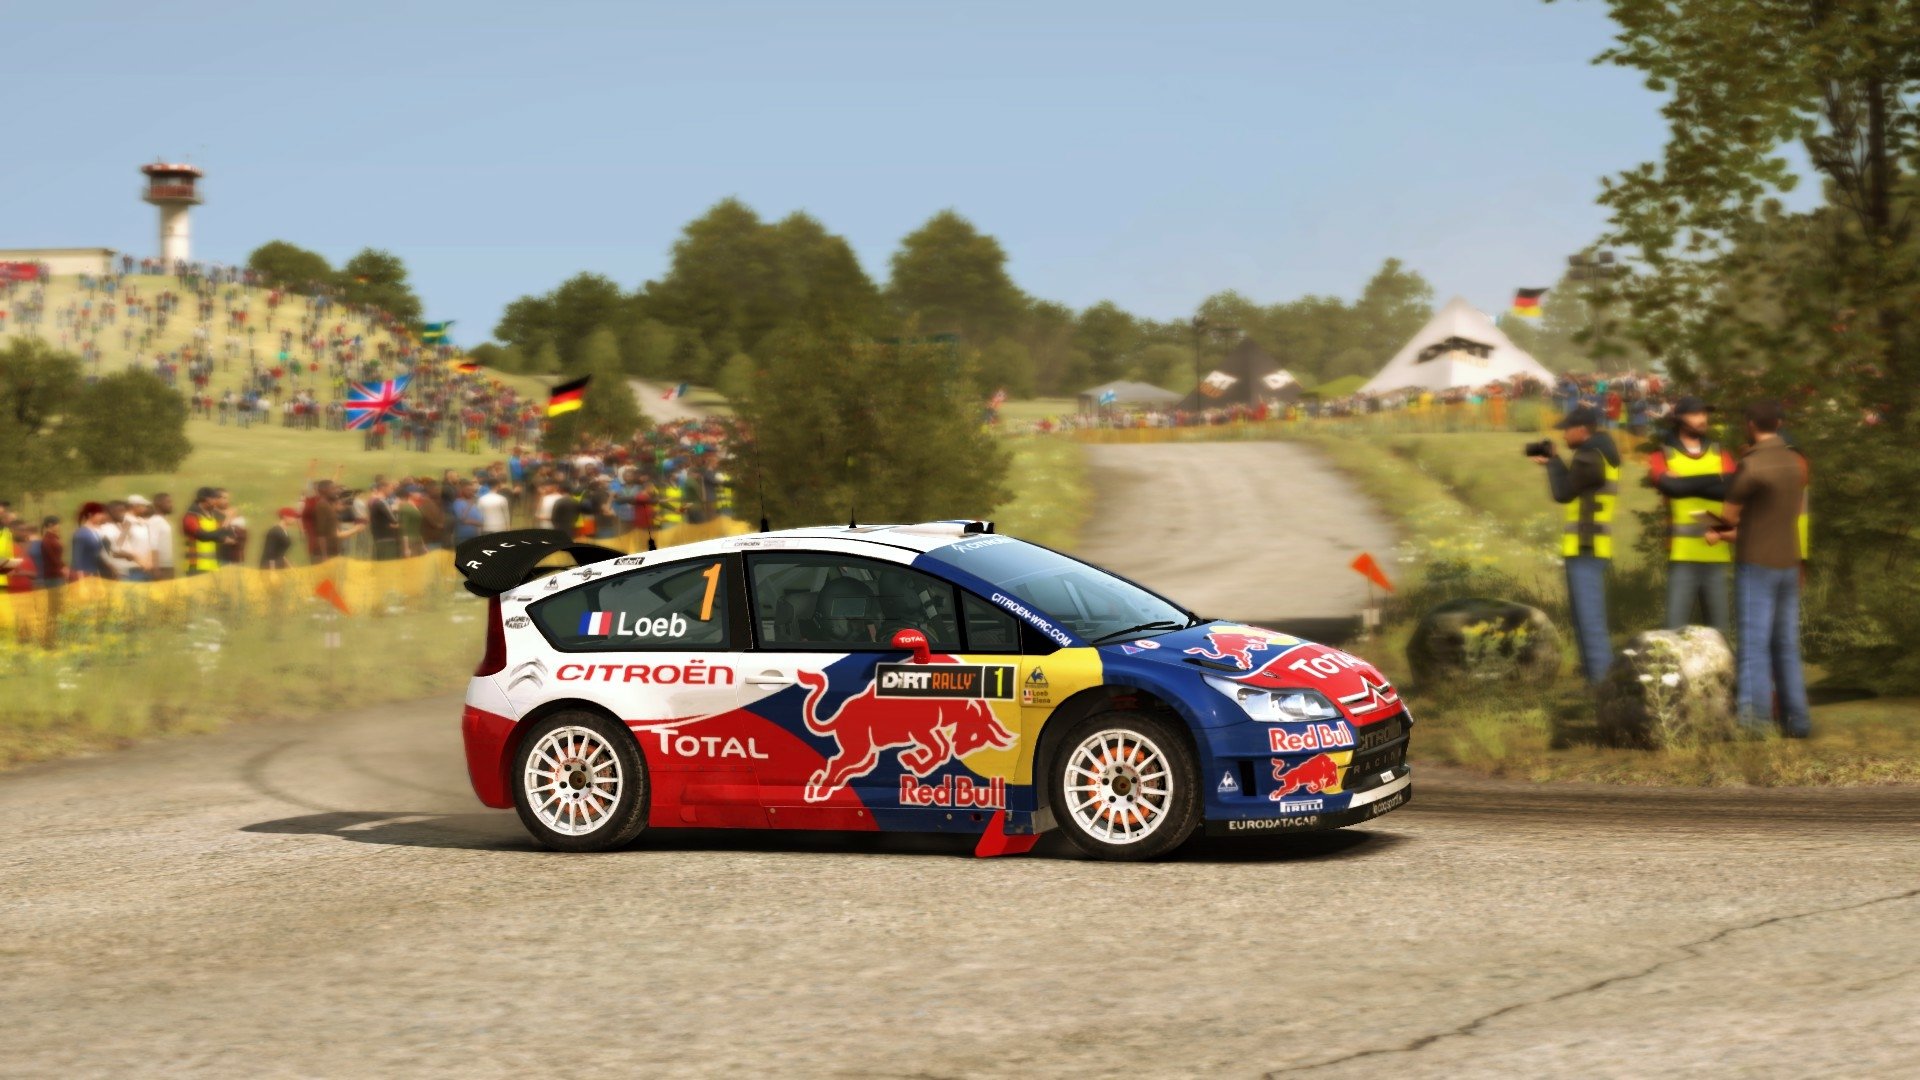 hd dirt rally background